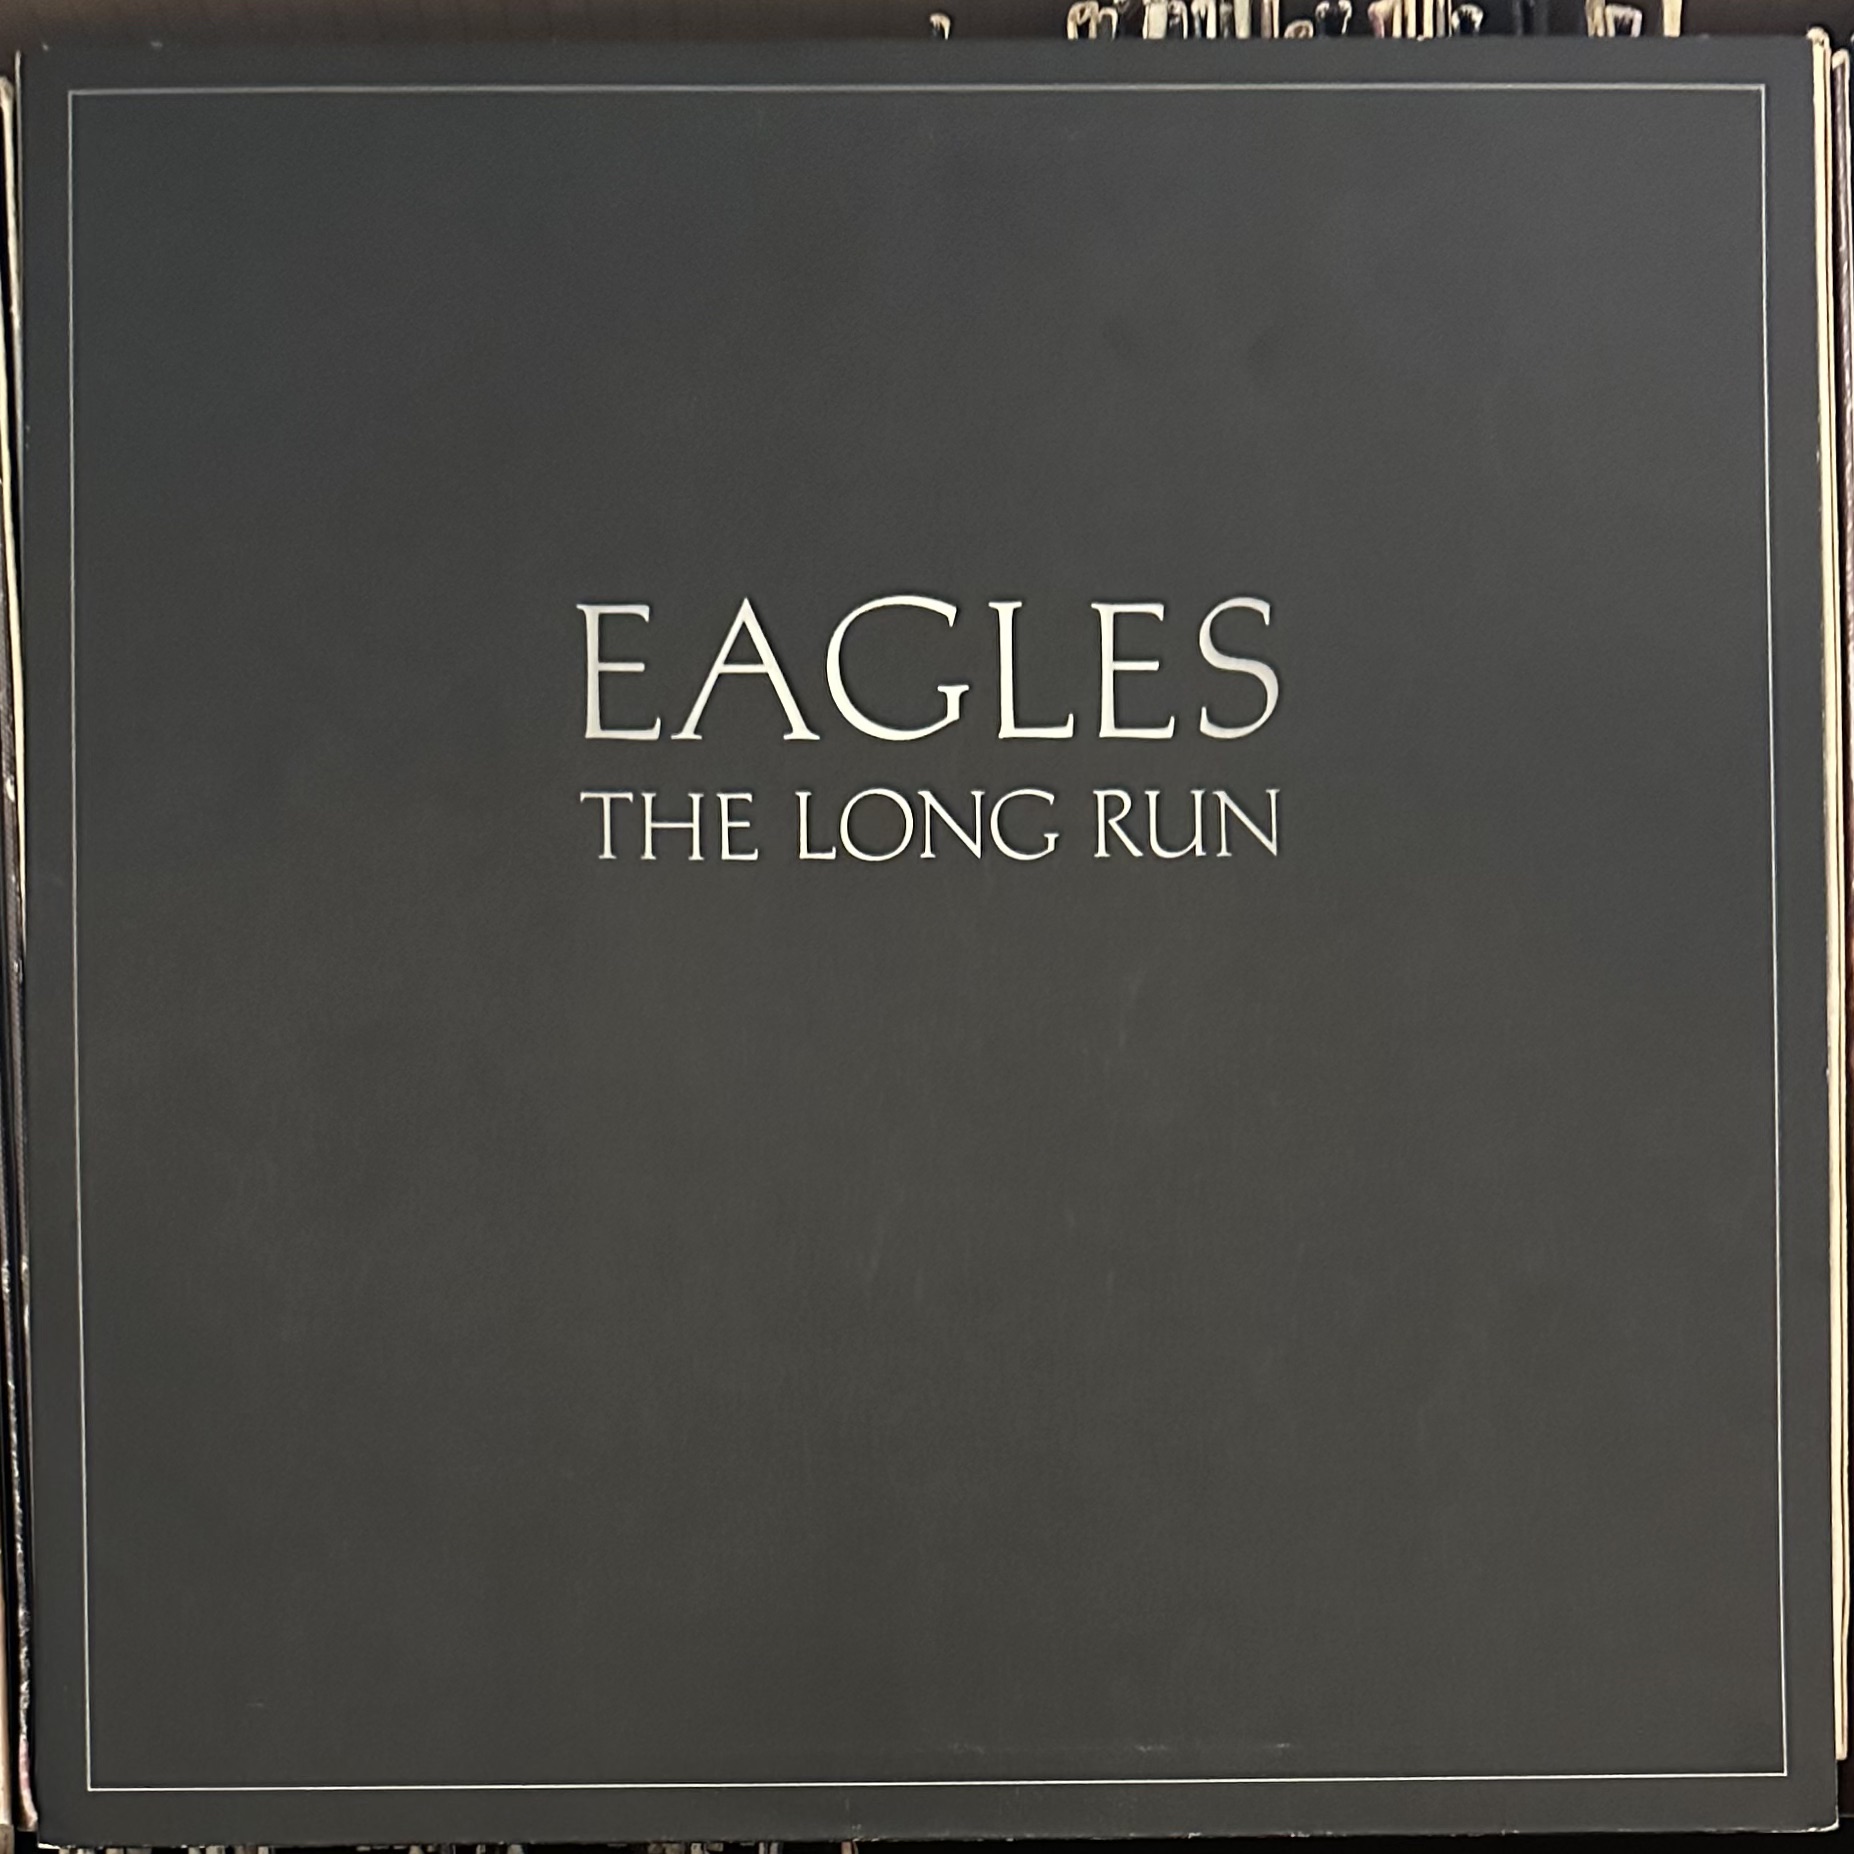 The Long Run by the Eagles